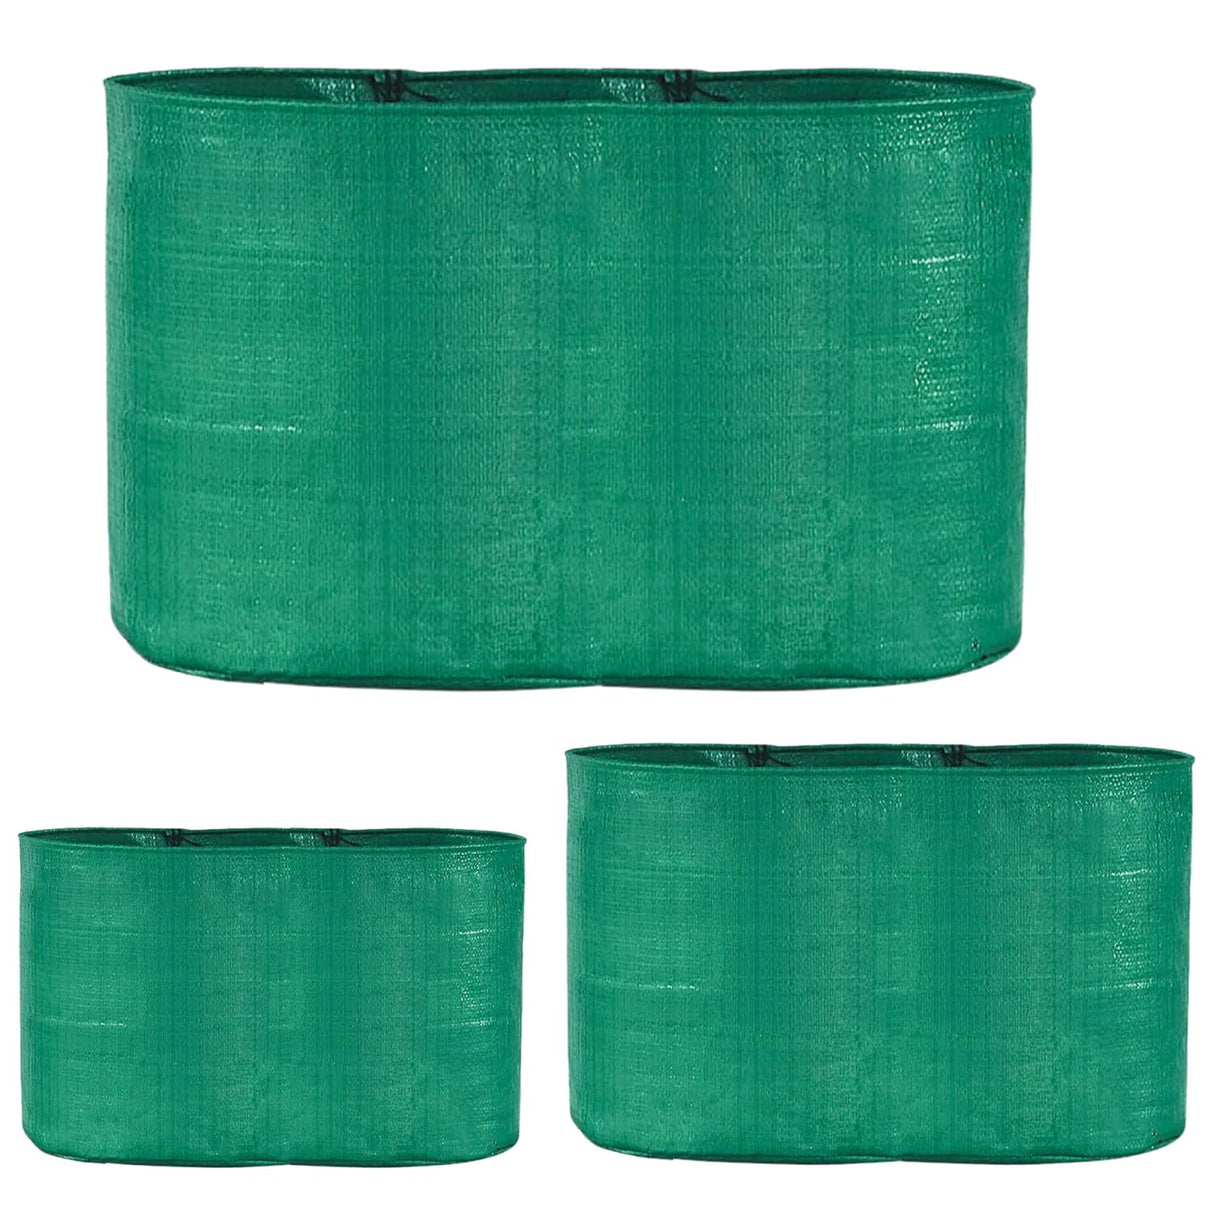 SINGHAL HDPE UV Protected Round Plants Grow Bags Combo, 9x12,15x9,24x9 Inch - Each 1 Bag (Pack of 3 Bags) for Terrace and Vegetable Gardening